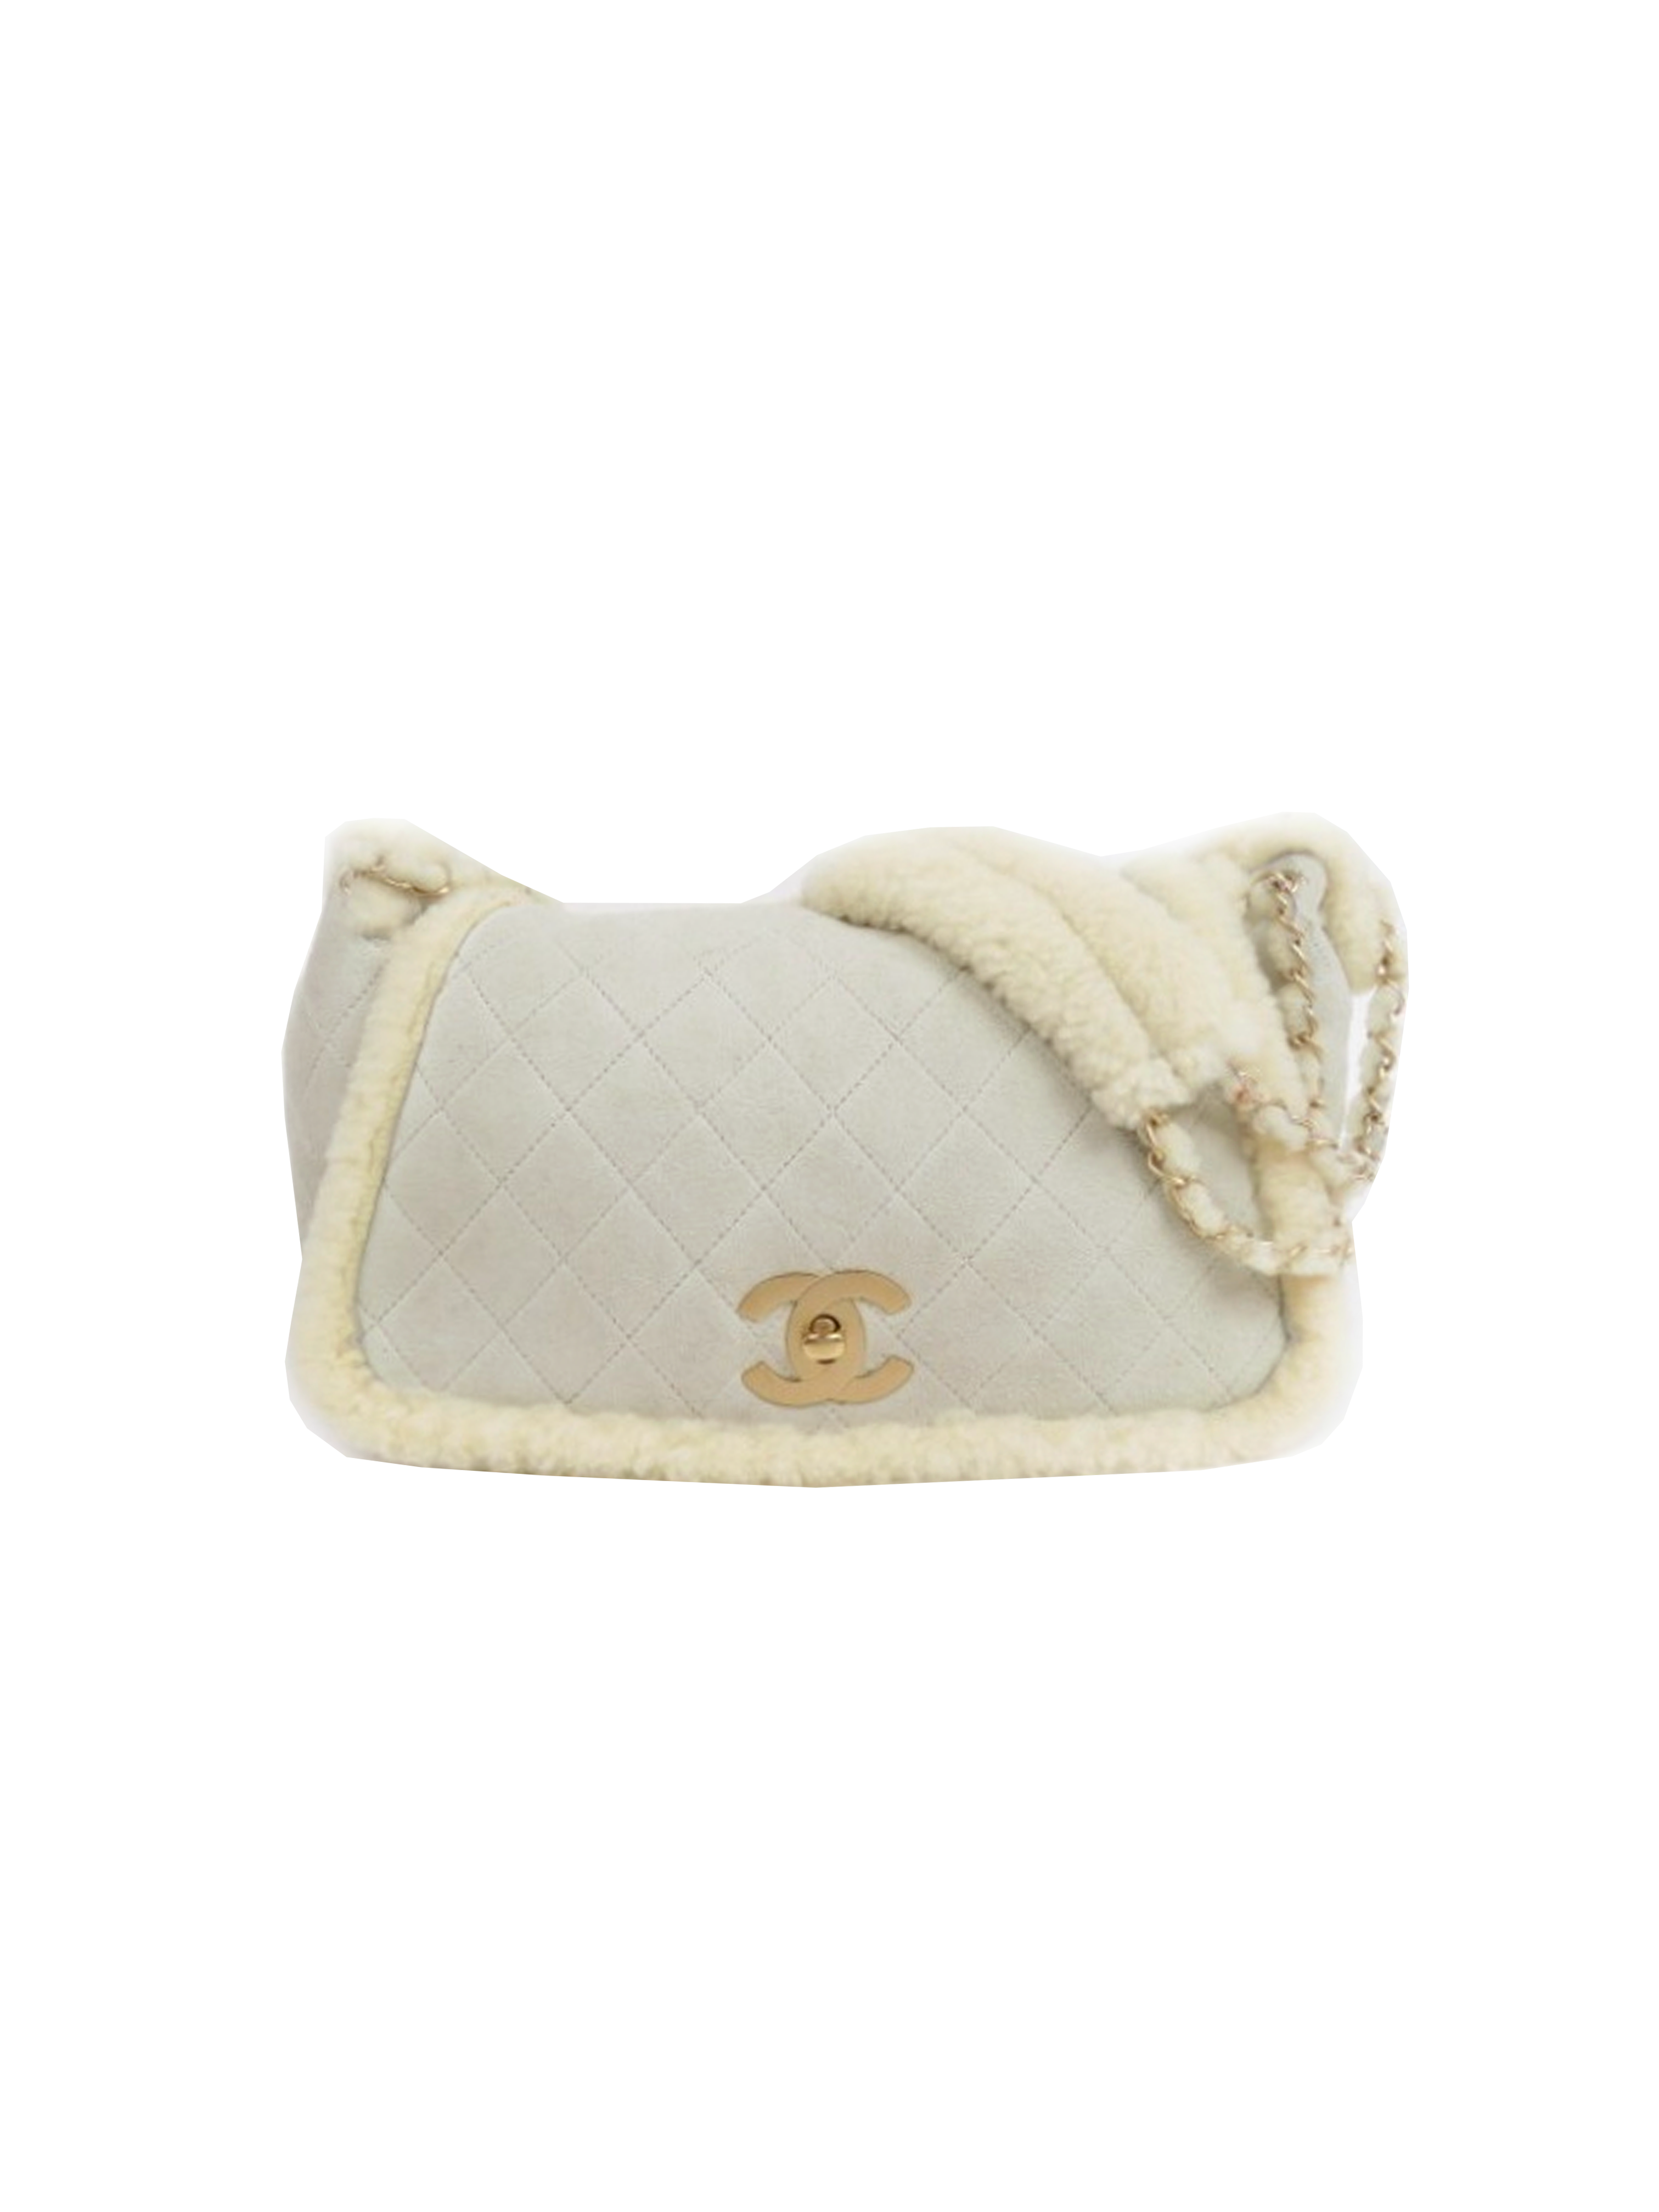 Chanel Shearling Rare Gold Hardware Flap · INTO